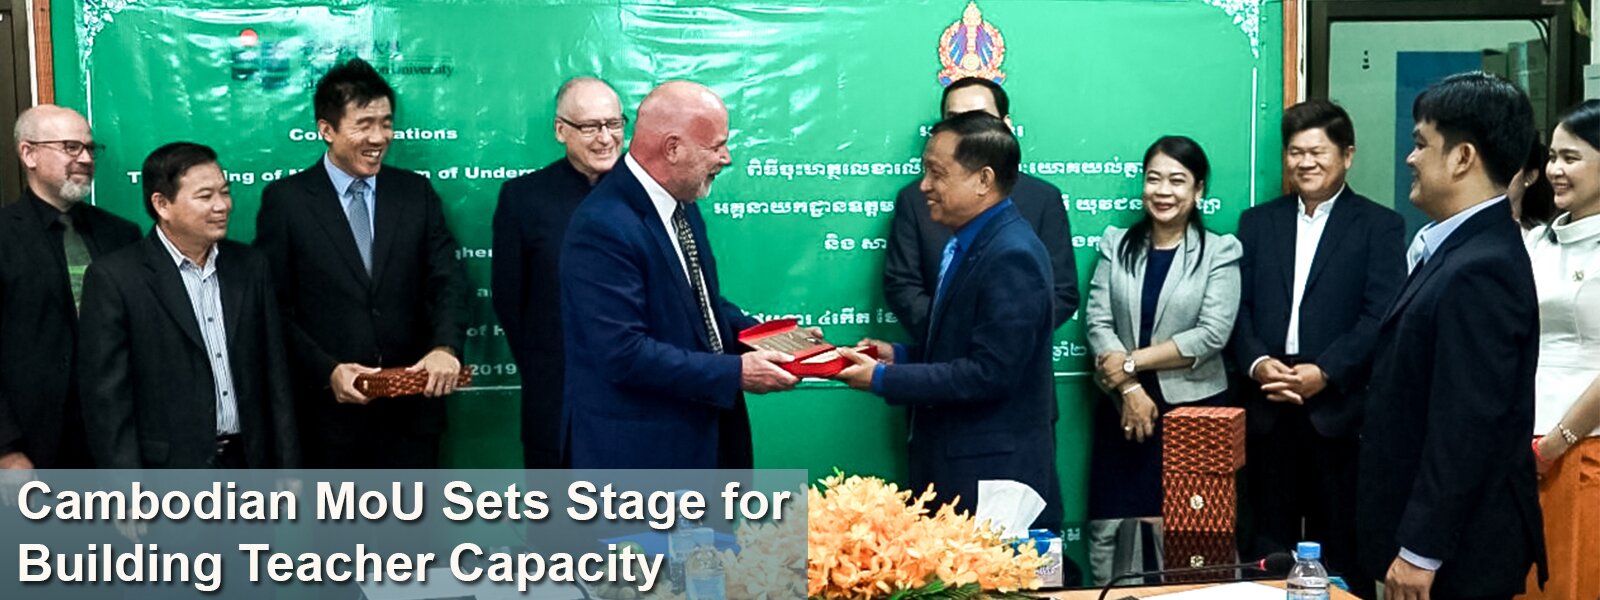 Cambodian MoU Sets Stage for Building Teacher Capacity